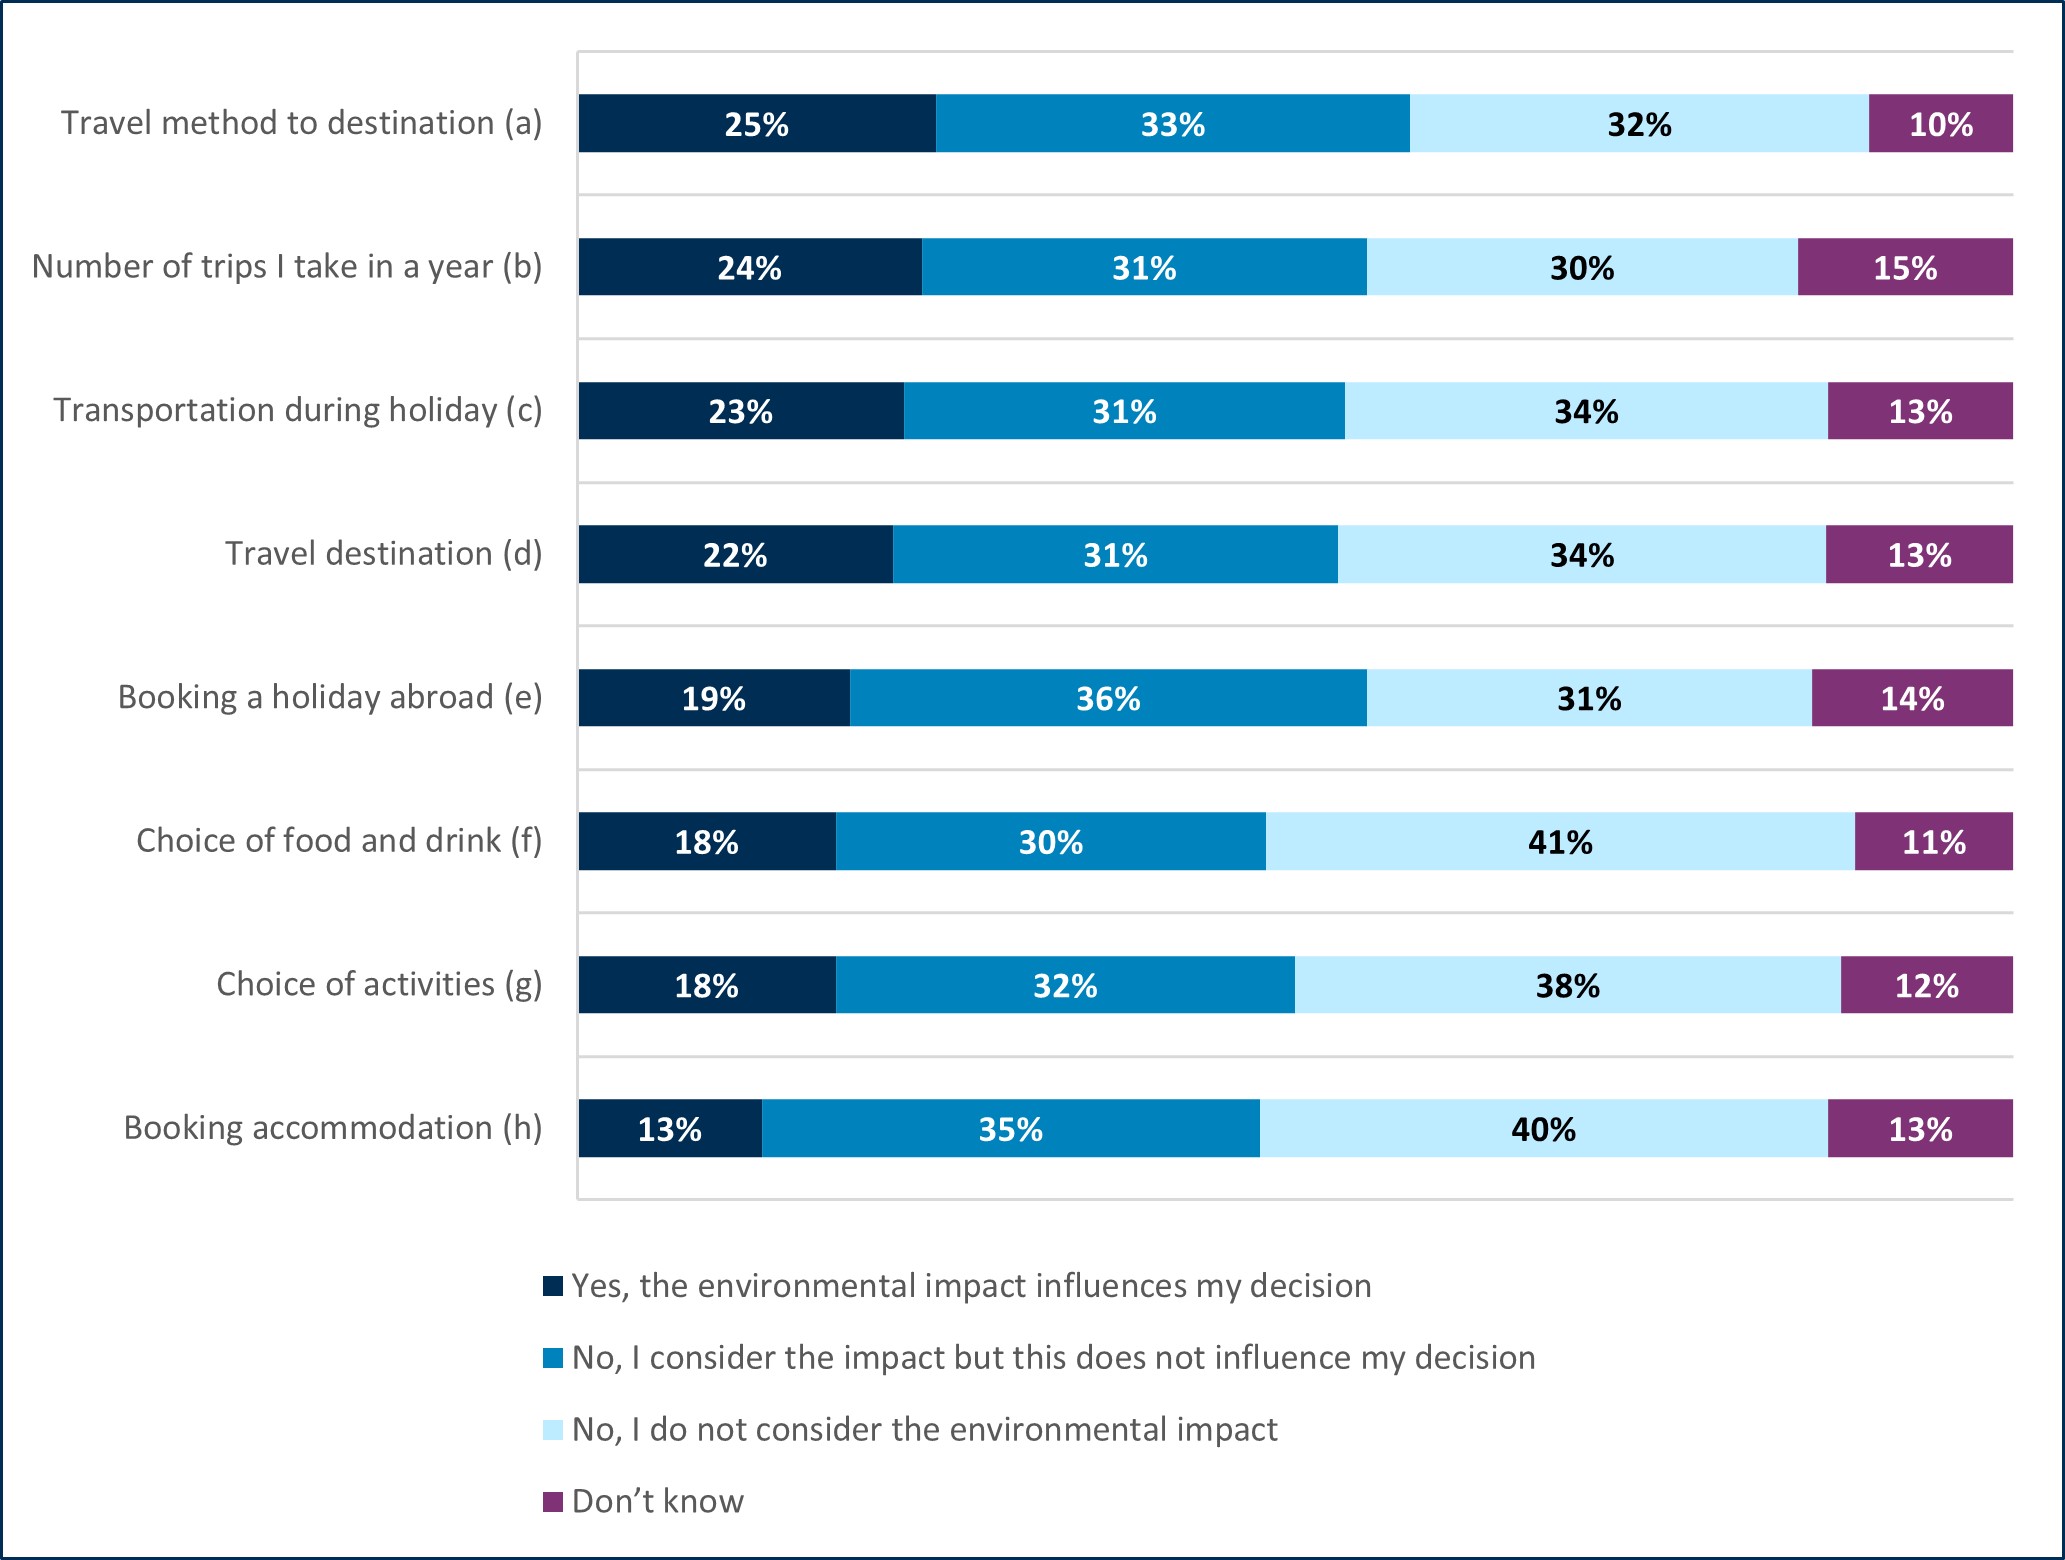 Data showing 25% of respondents are influenced by environmental impact of travel methods, 24% state the same in relation to number of trips per year and transport on holiday(23%). Respondents consider environmental impacts of a holiday, but it does not influence booking a holiday aboard (36%), accommodation (35%), and travel to destination (33%). 41% do not consider environmental impact of their food and drink, 40% do not consider it when booking accommodation  and 38% when selecting activities on holiday